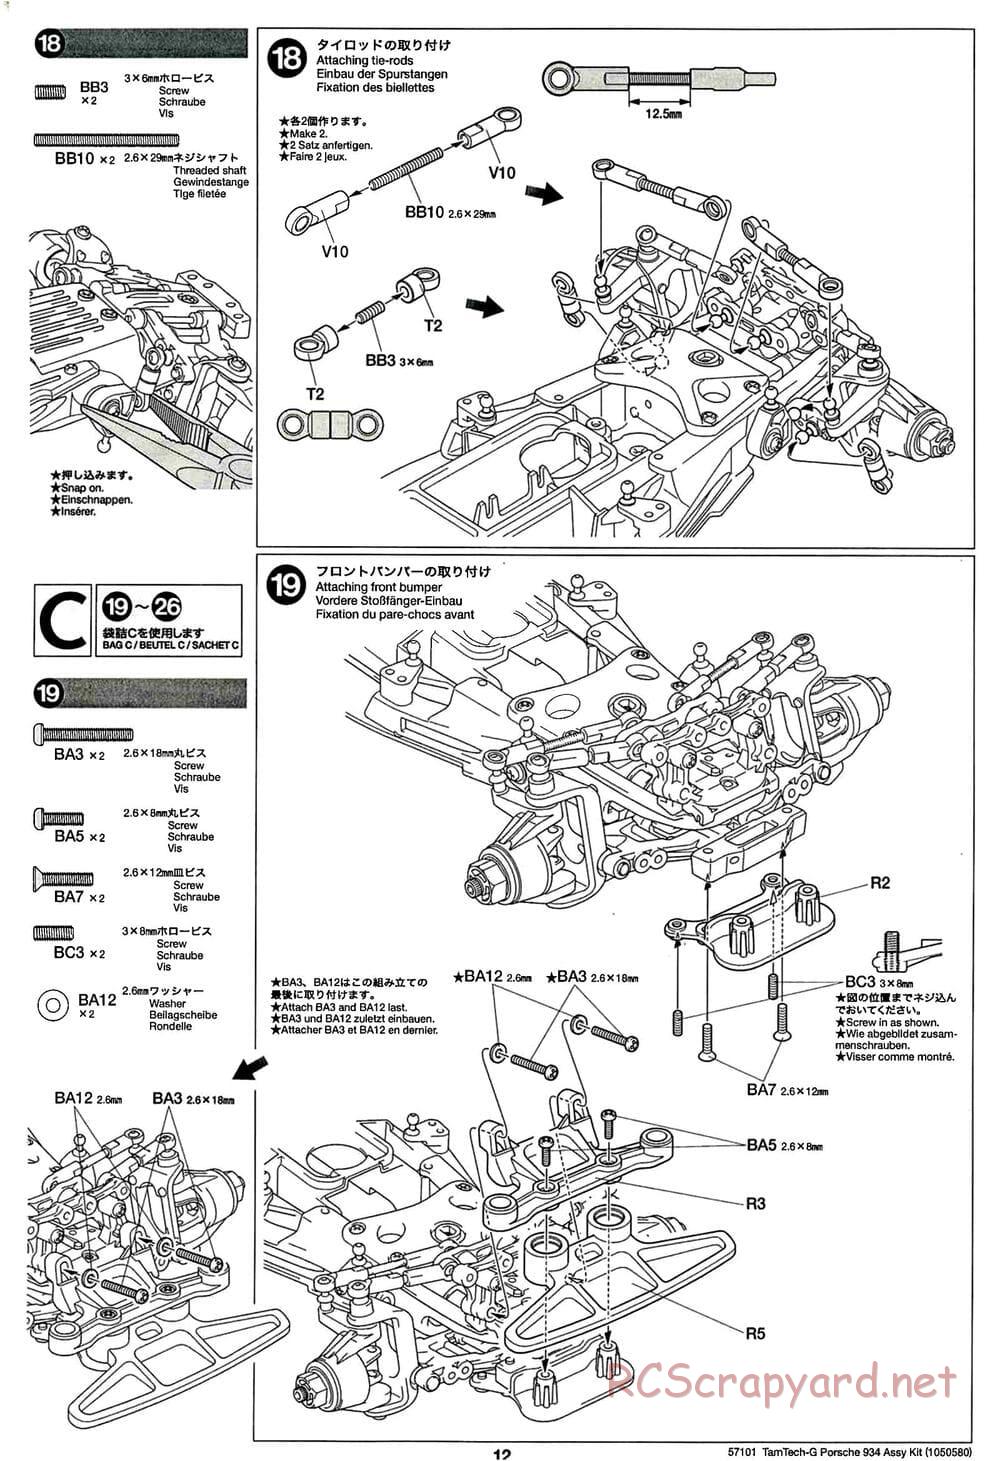 Tamiya - Porsche Turbo RSR - GT-01 Chassis - Manual - Page 12